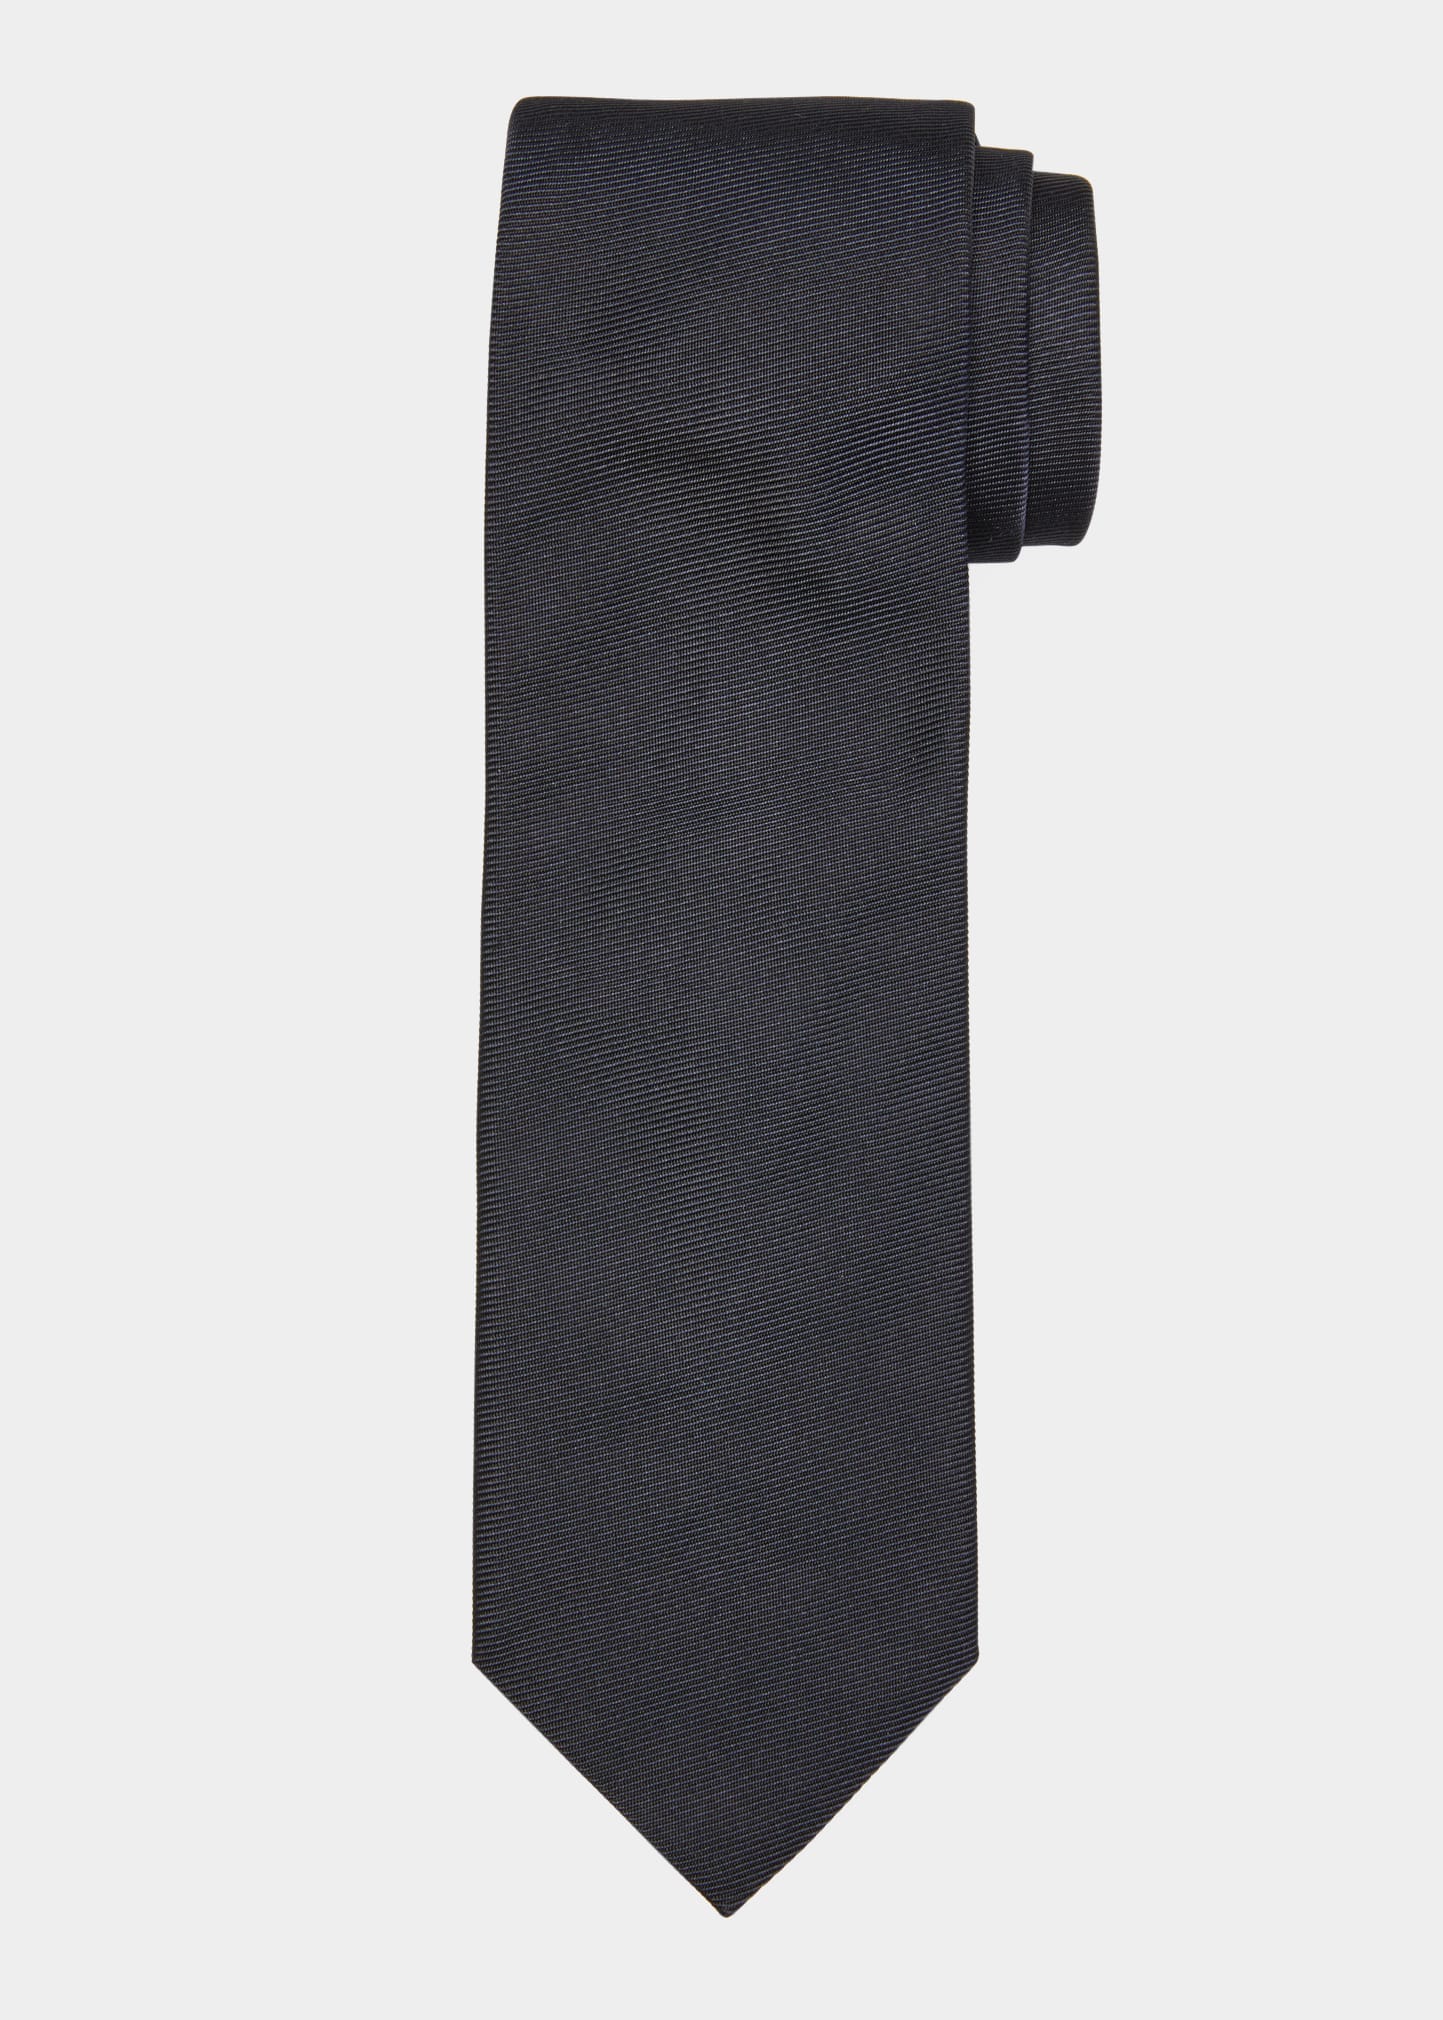 TOM FORD Men's Solid Twill Tie